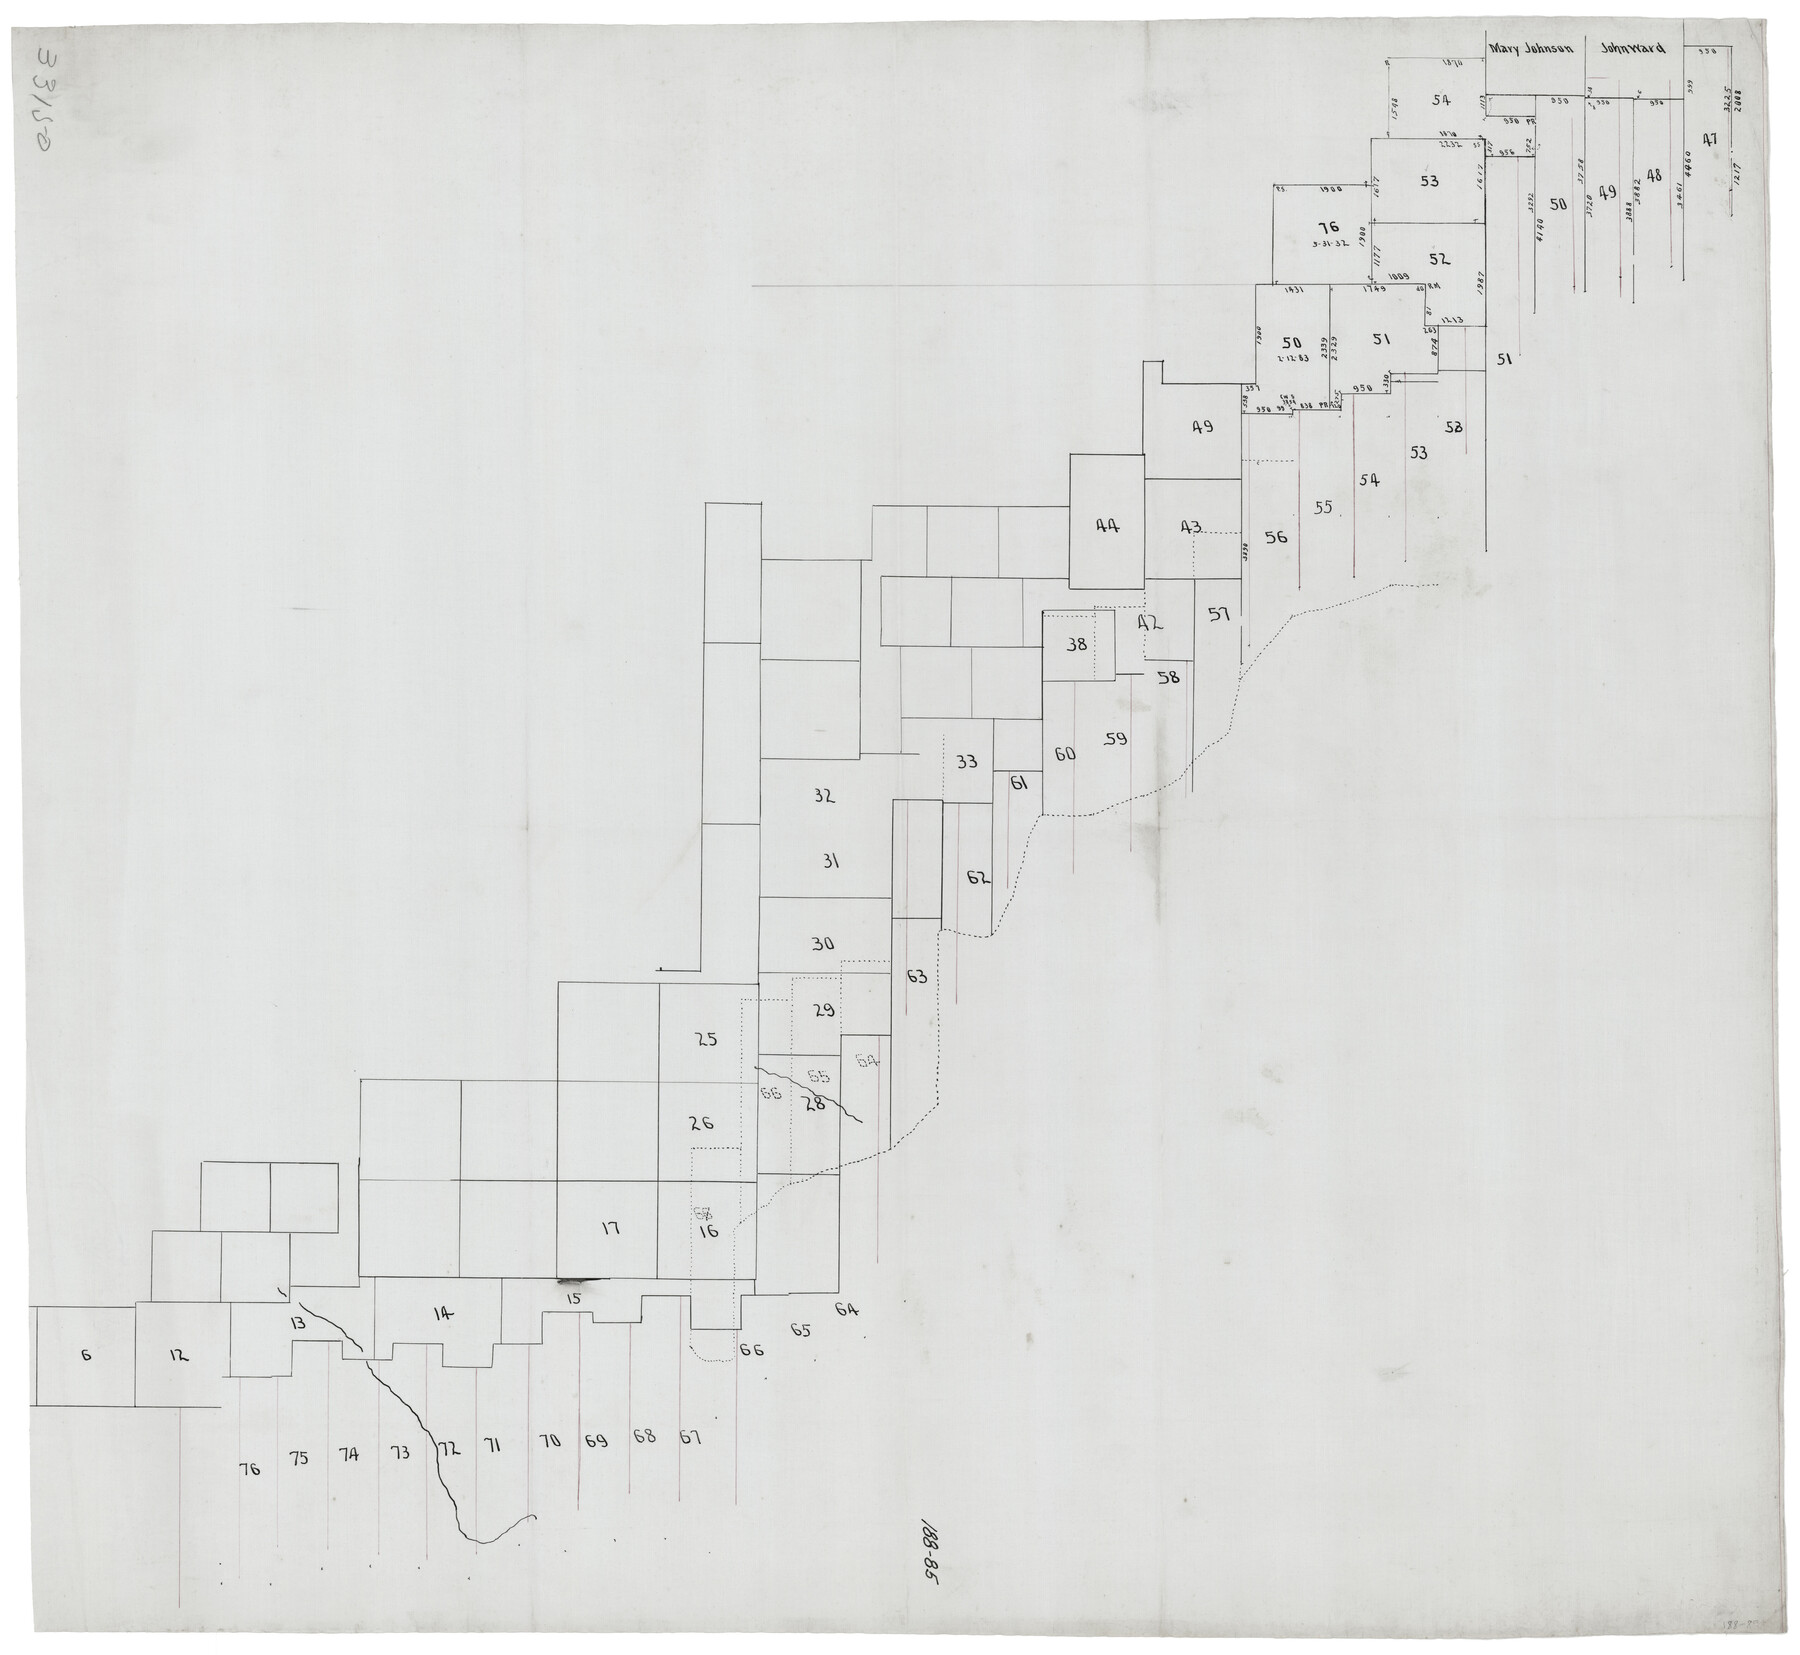 91807, [Sections 47-76 and part of Block 3], Twichell Survey Records